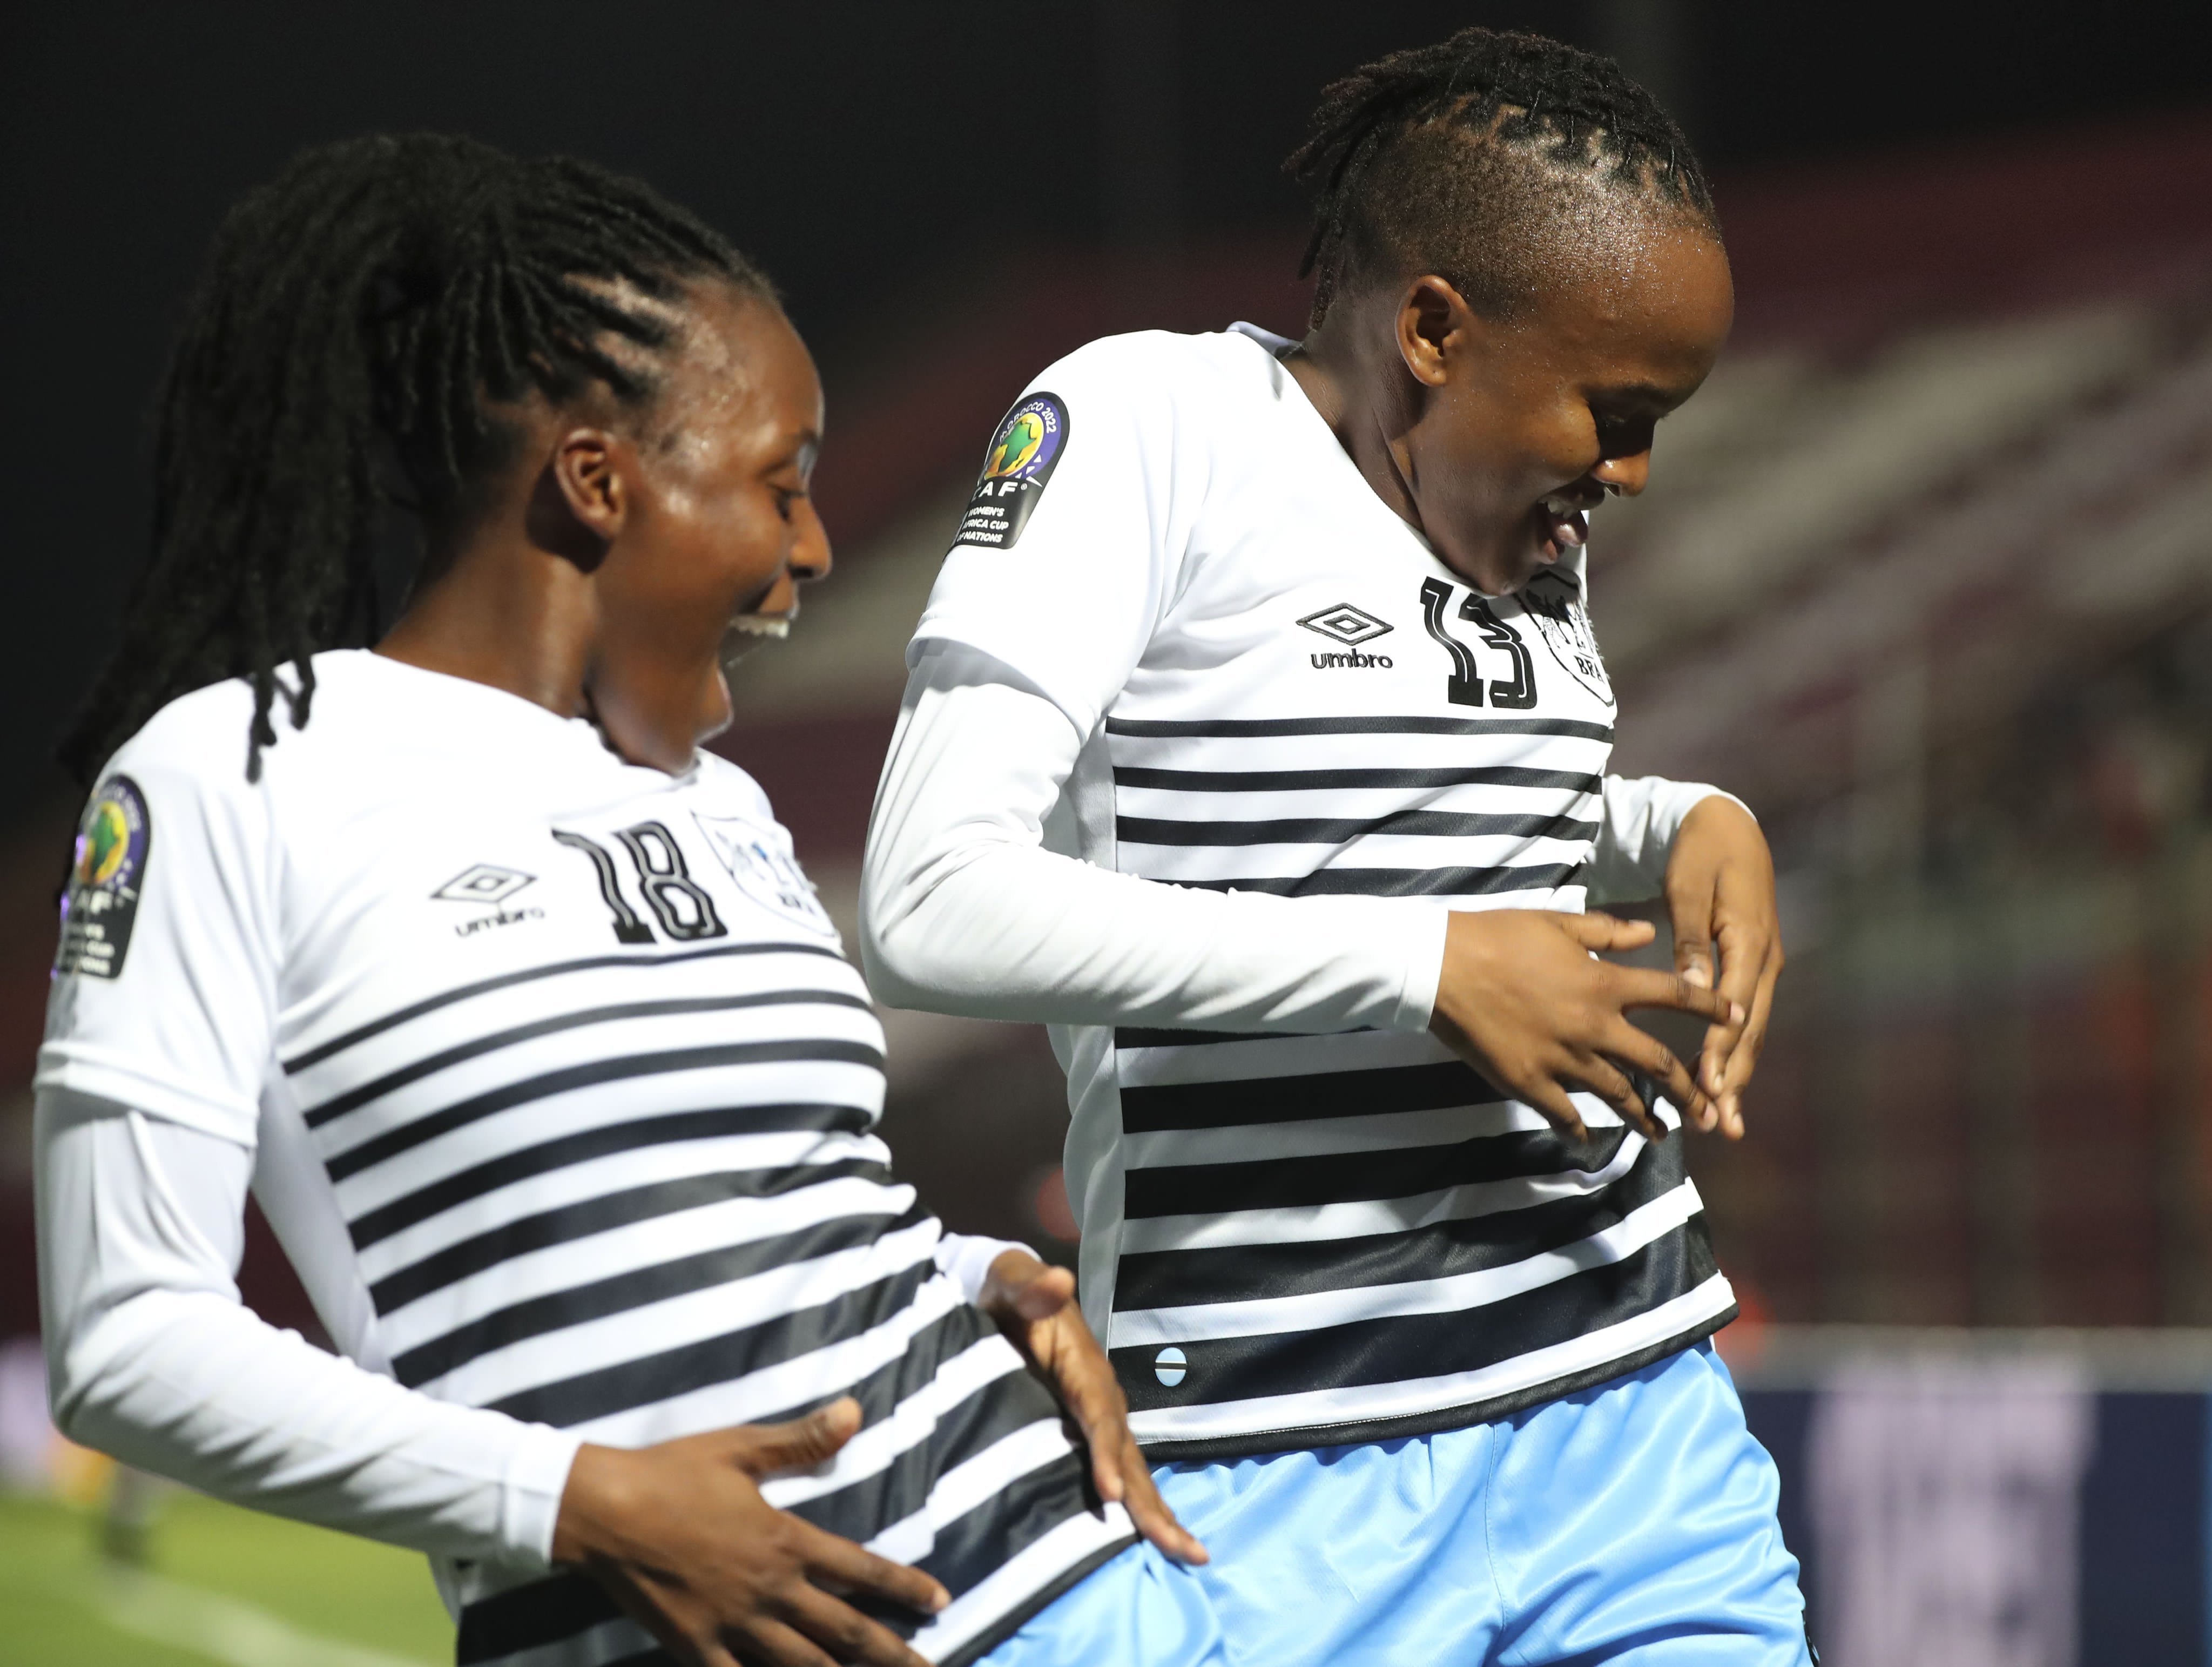 Botswana's Mares won their first ever game at a Women's AFCON 